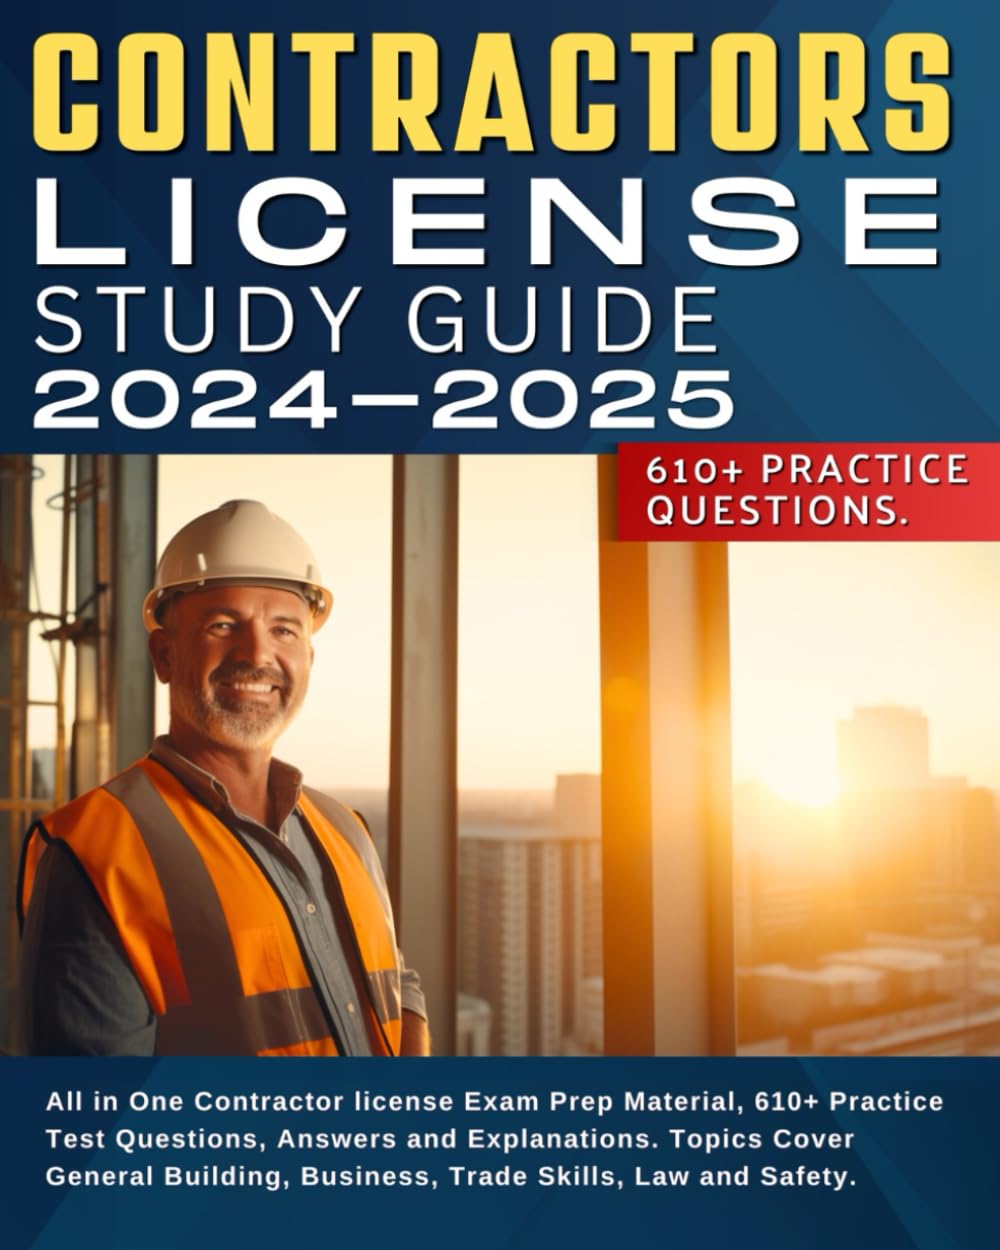 Contractors License Study Guide 2024-2025: All in One Contractor license Exam Prep Material, 610+ Practice Test Questions, Answers and Explanations. ... Business, Trade Skills, Law and Safety.